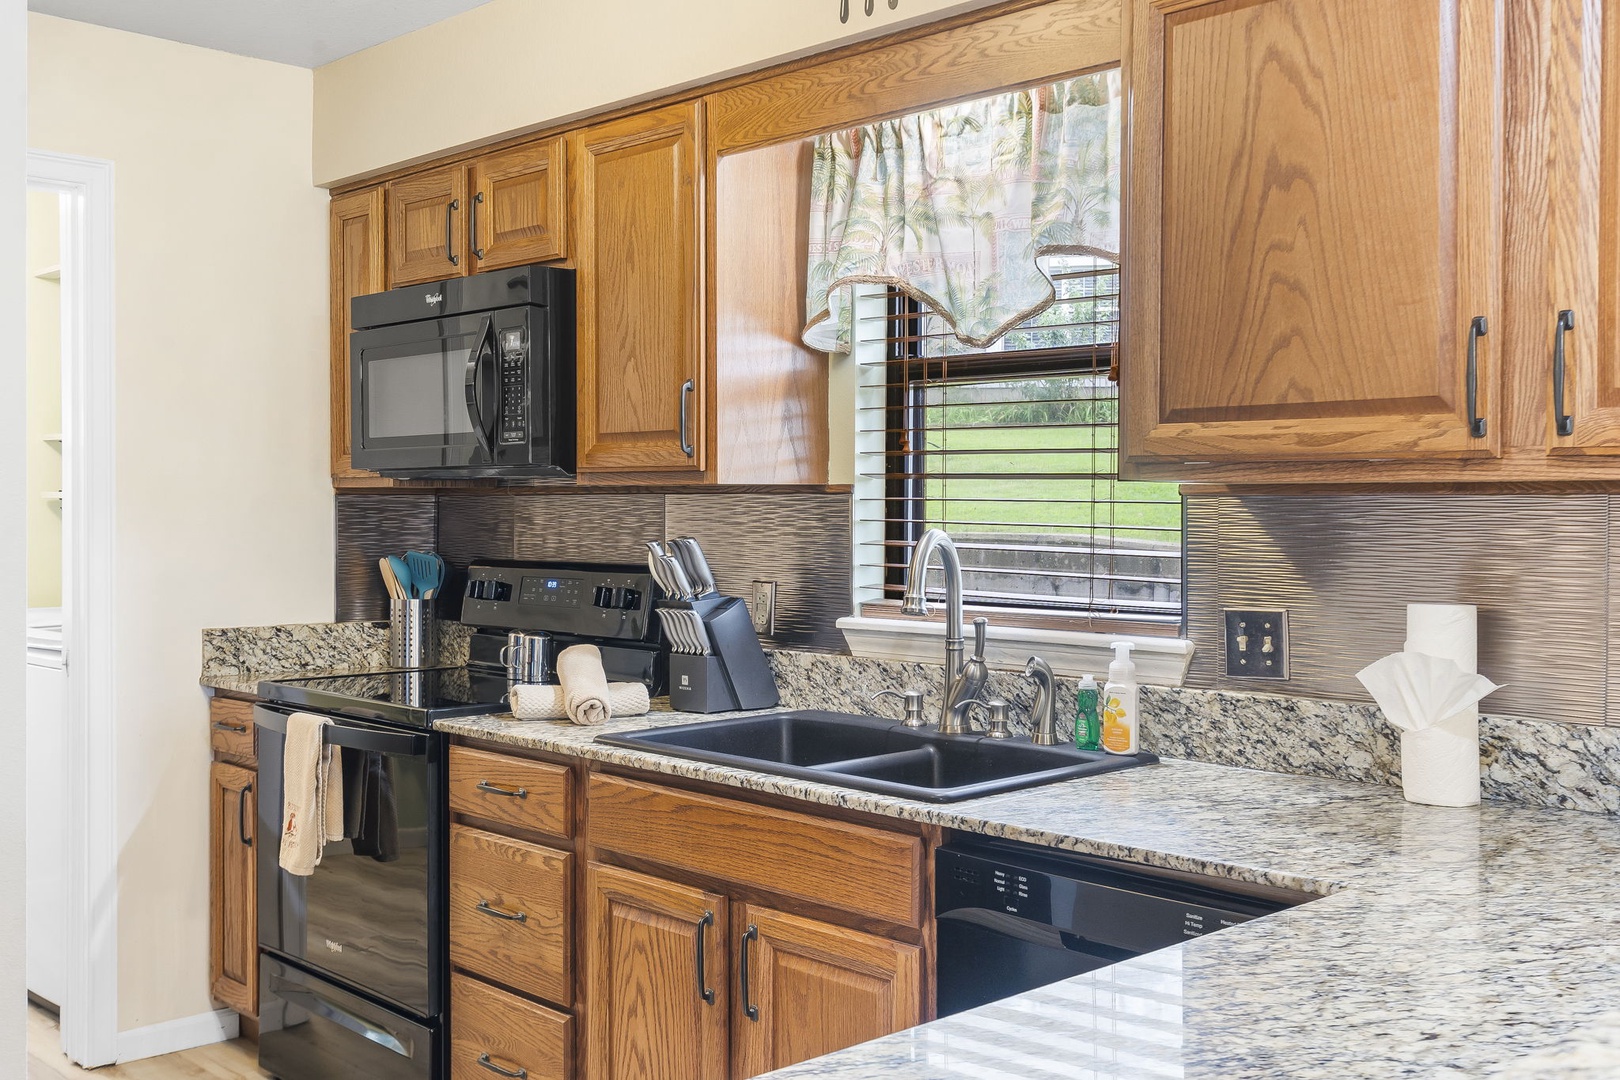 The kitchen offers ample counter space & all the comforts of home